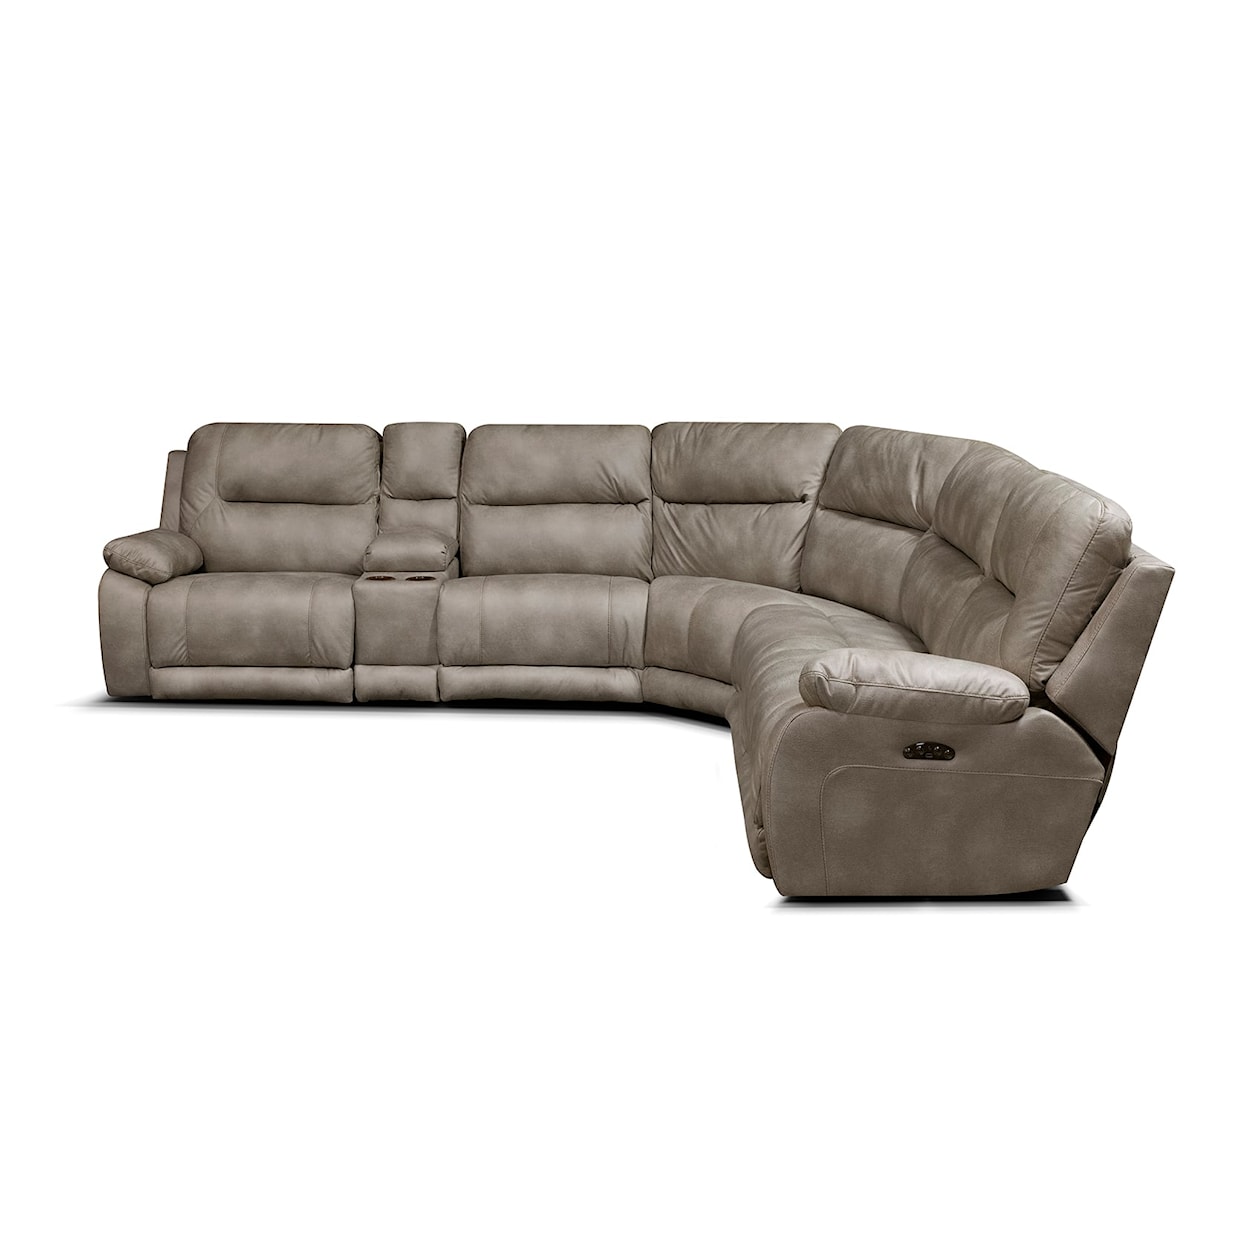 Dimensions EZ9K00/H Series 6-Piece Sectional Sofa with Power Headrest